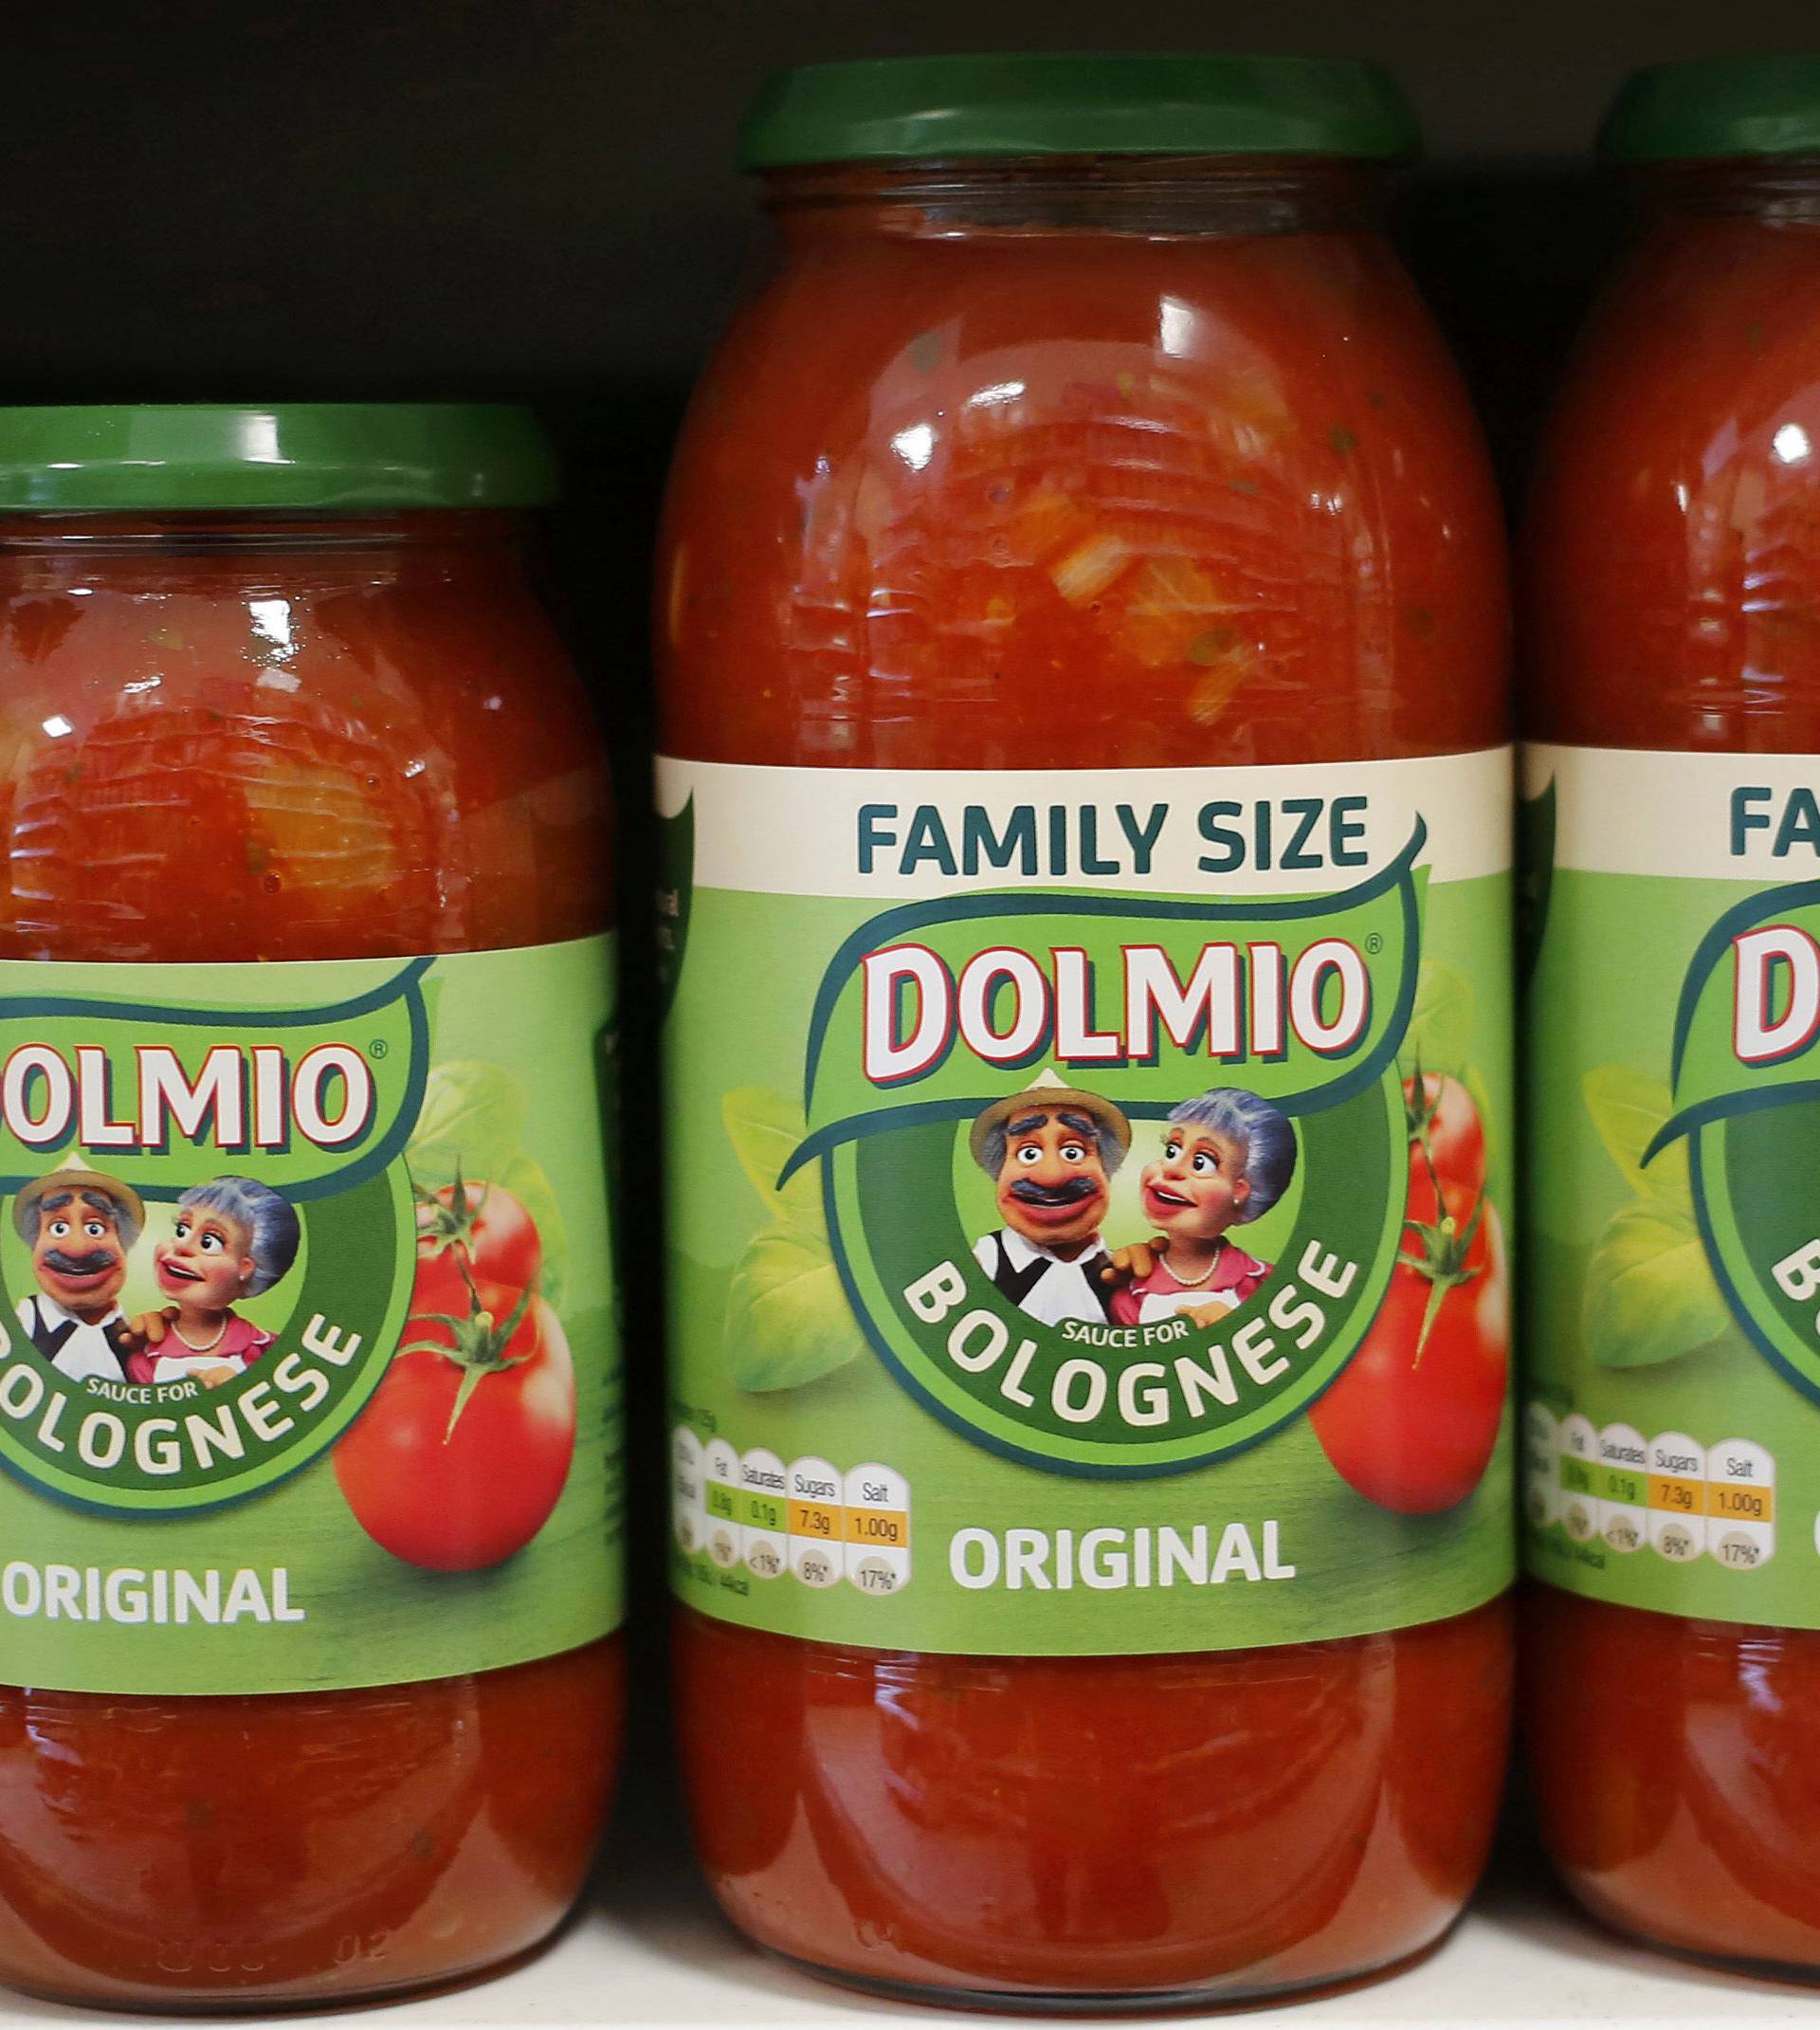 Dolmio pasta sauces are seen in a store in in London